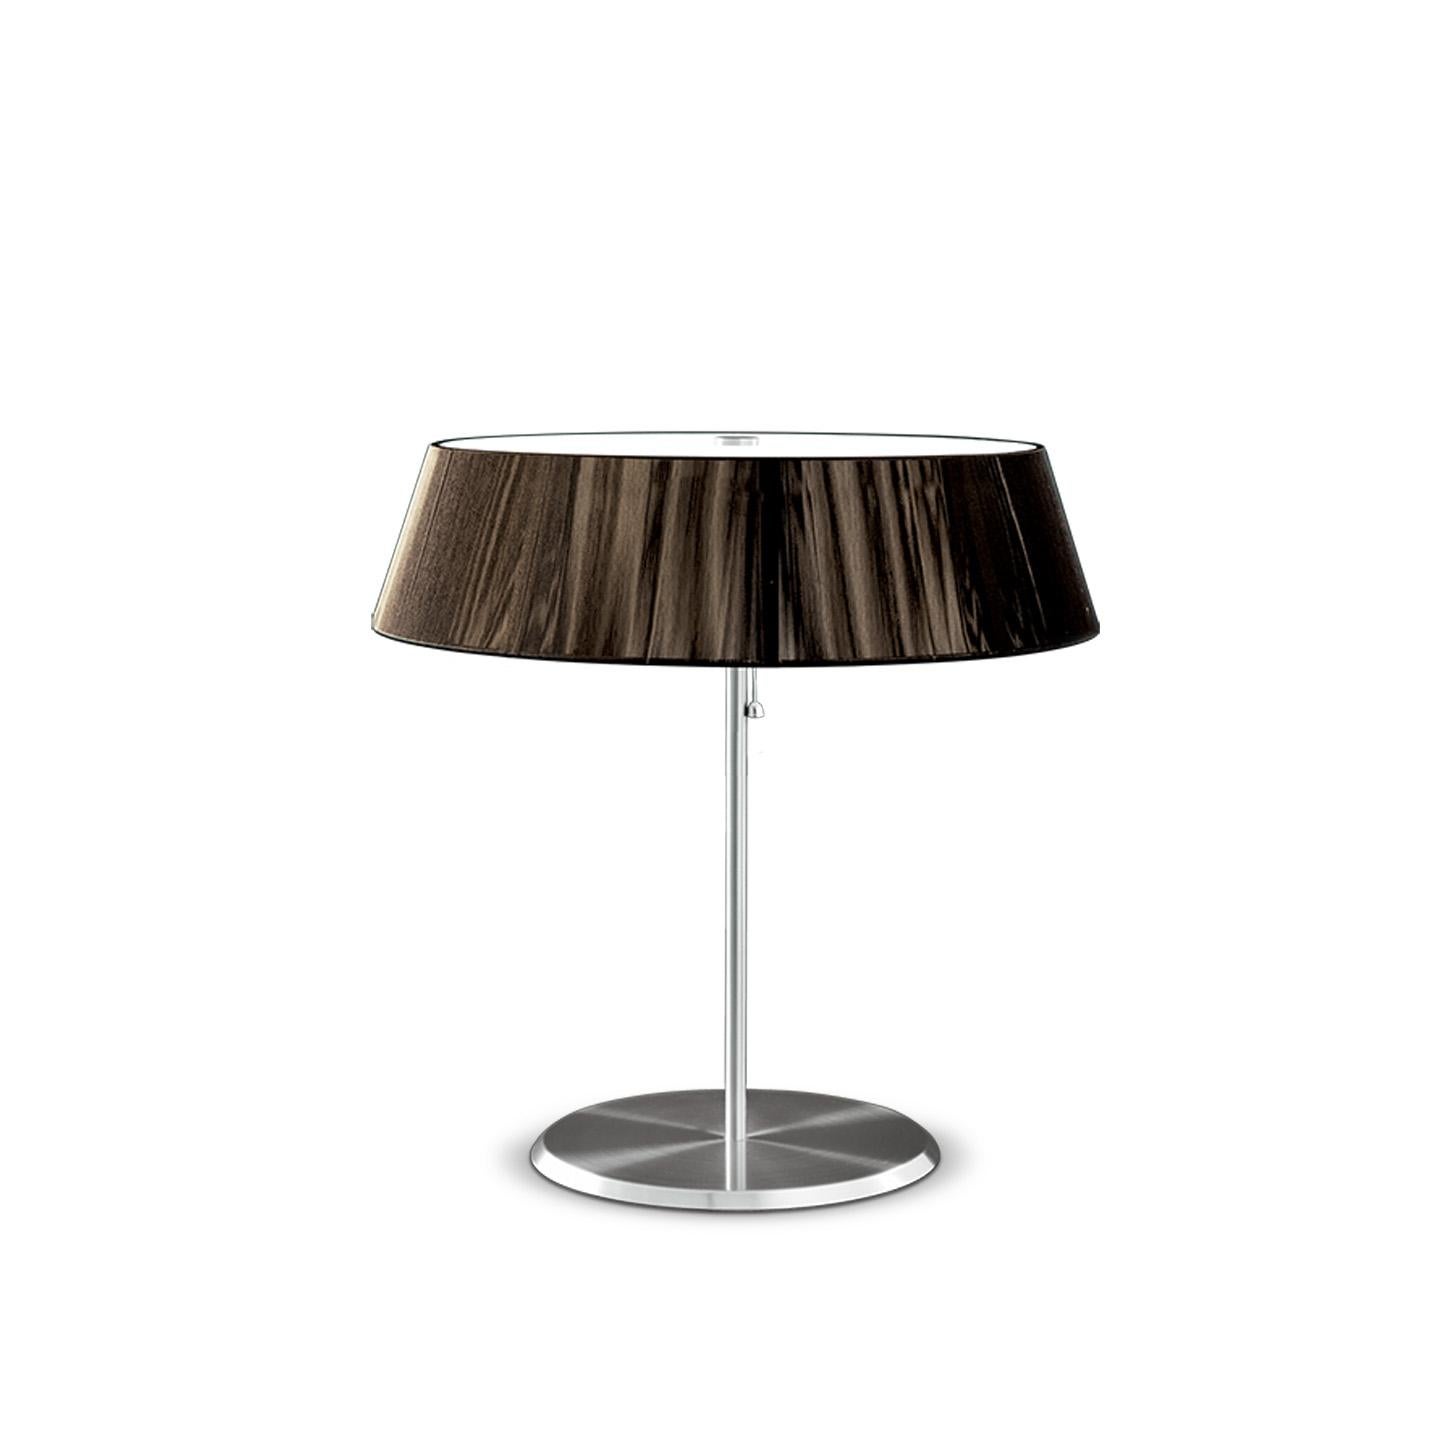 The Lilith table lamp is an elegant lighting solution with a stunning light effect created by threading thin string in a consistent pattern across the shade. As you engage it from different viewpoints, the light pattern shimmers and changes and the